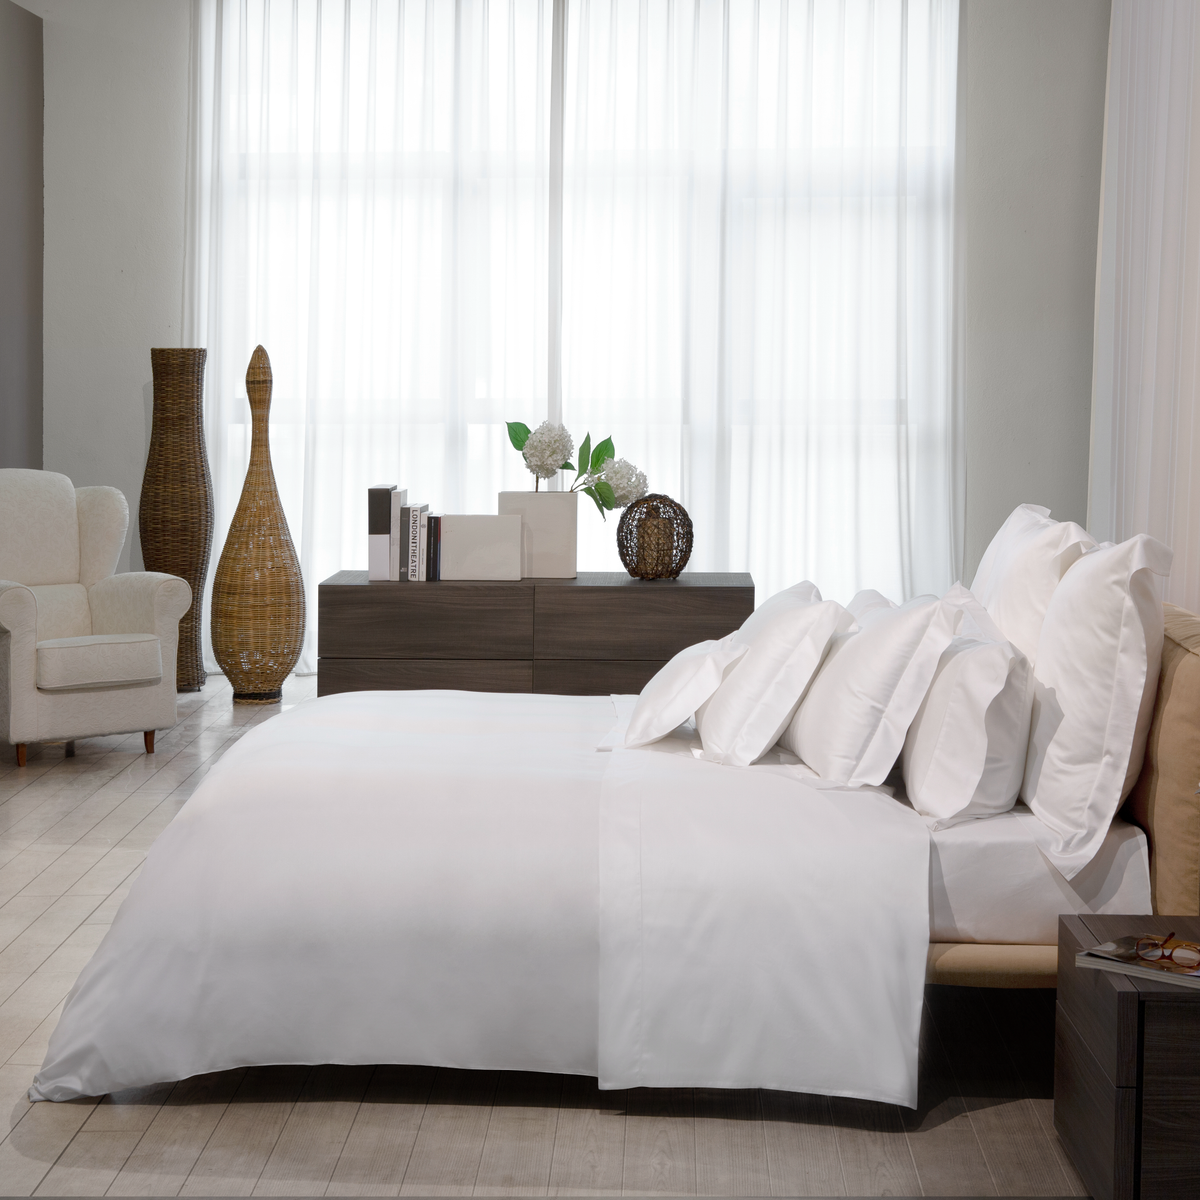 Full Bed Dressed in White Signoria Nuvola Percale Bedding